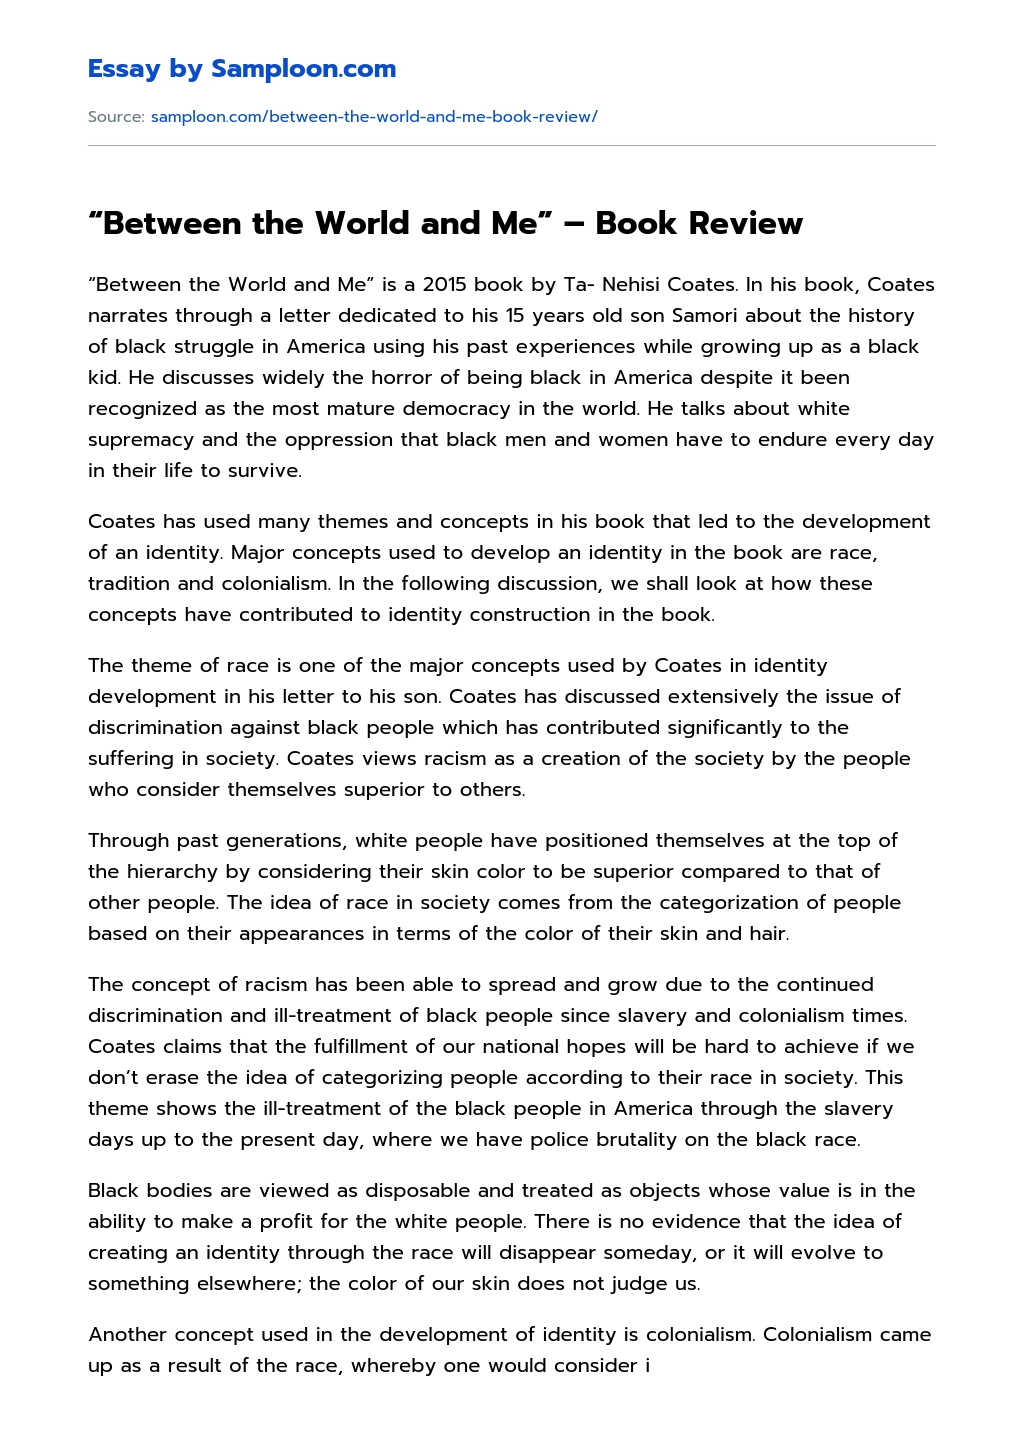 “Between the World and Me” – Book Review essay